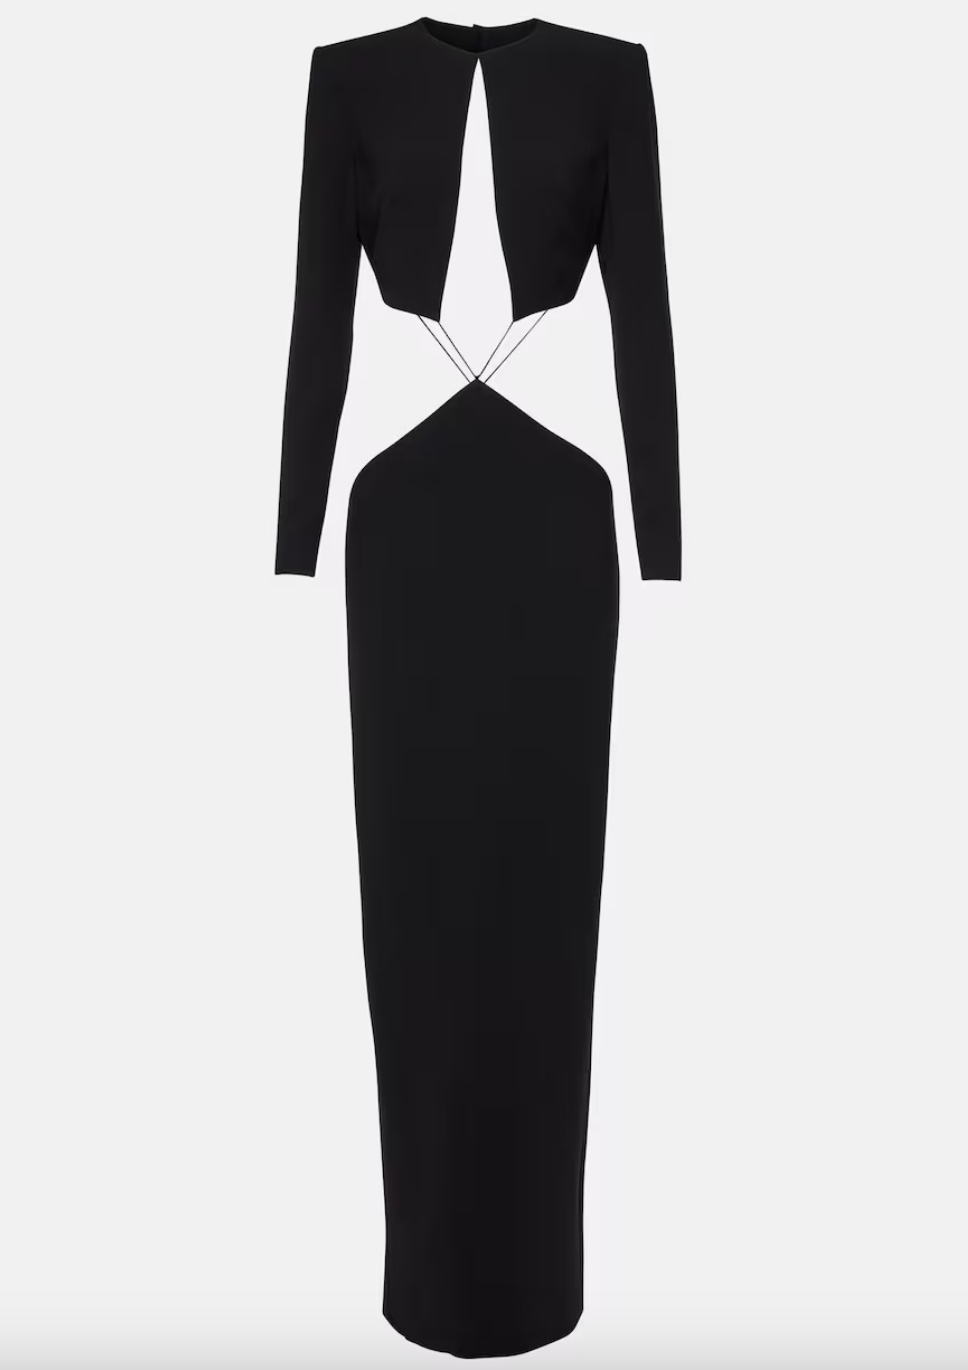 Paige DeSorbo's Black Cutout Long Sleeve Gown